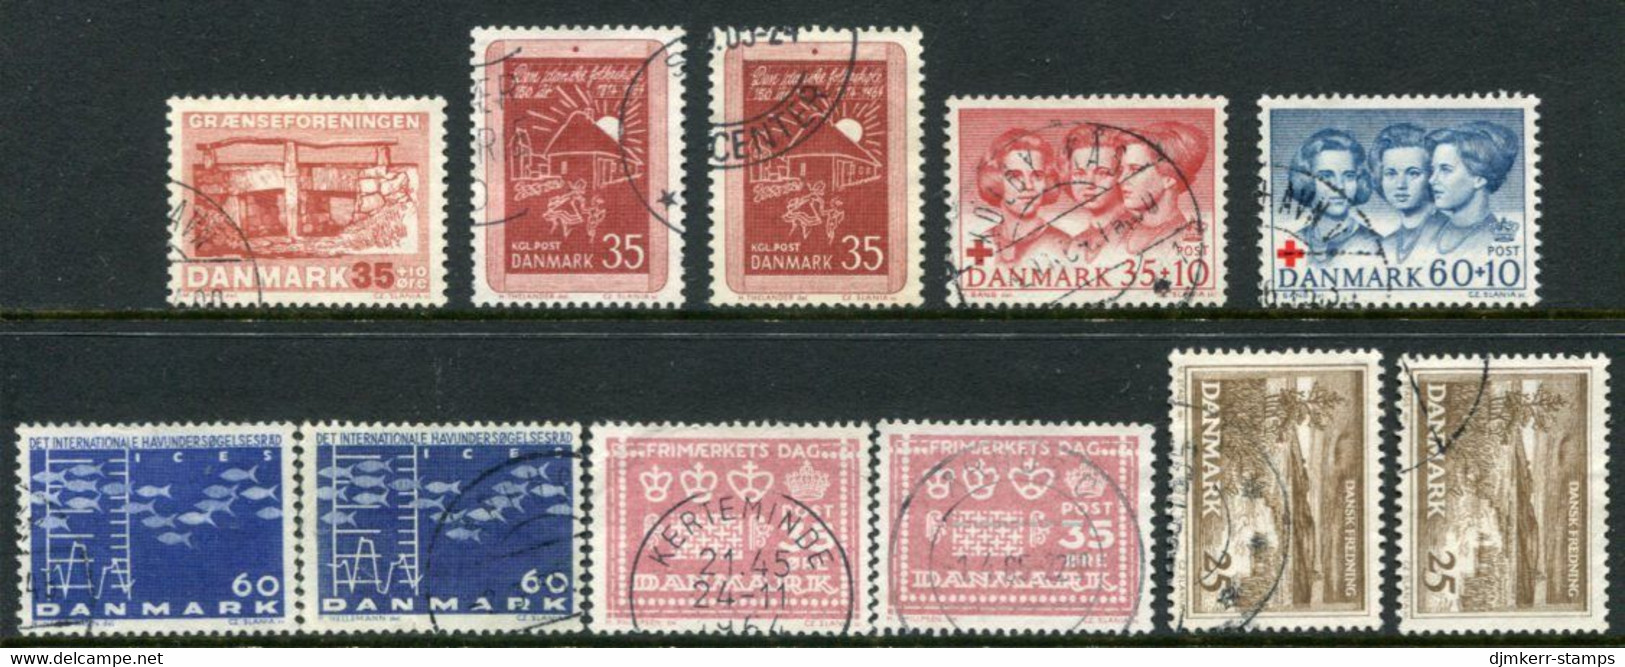 DENMARK 1964 Complete Issues With Ordinary And Fluorescent Papers, Used Michel 419-425y - Oblitérés